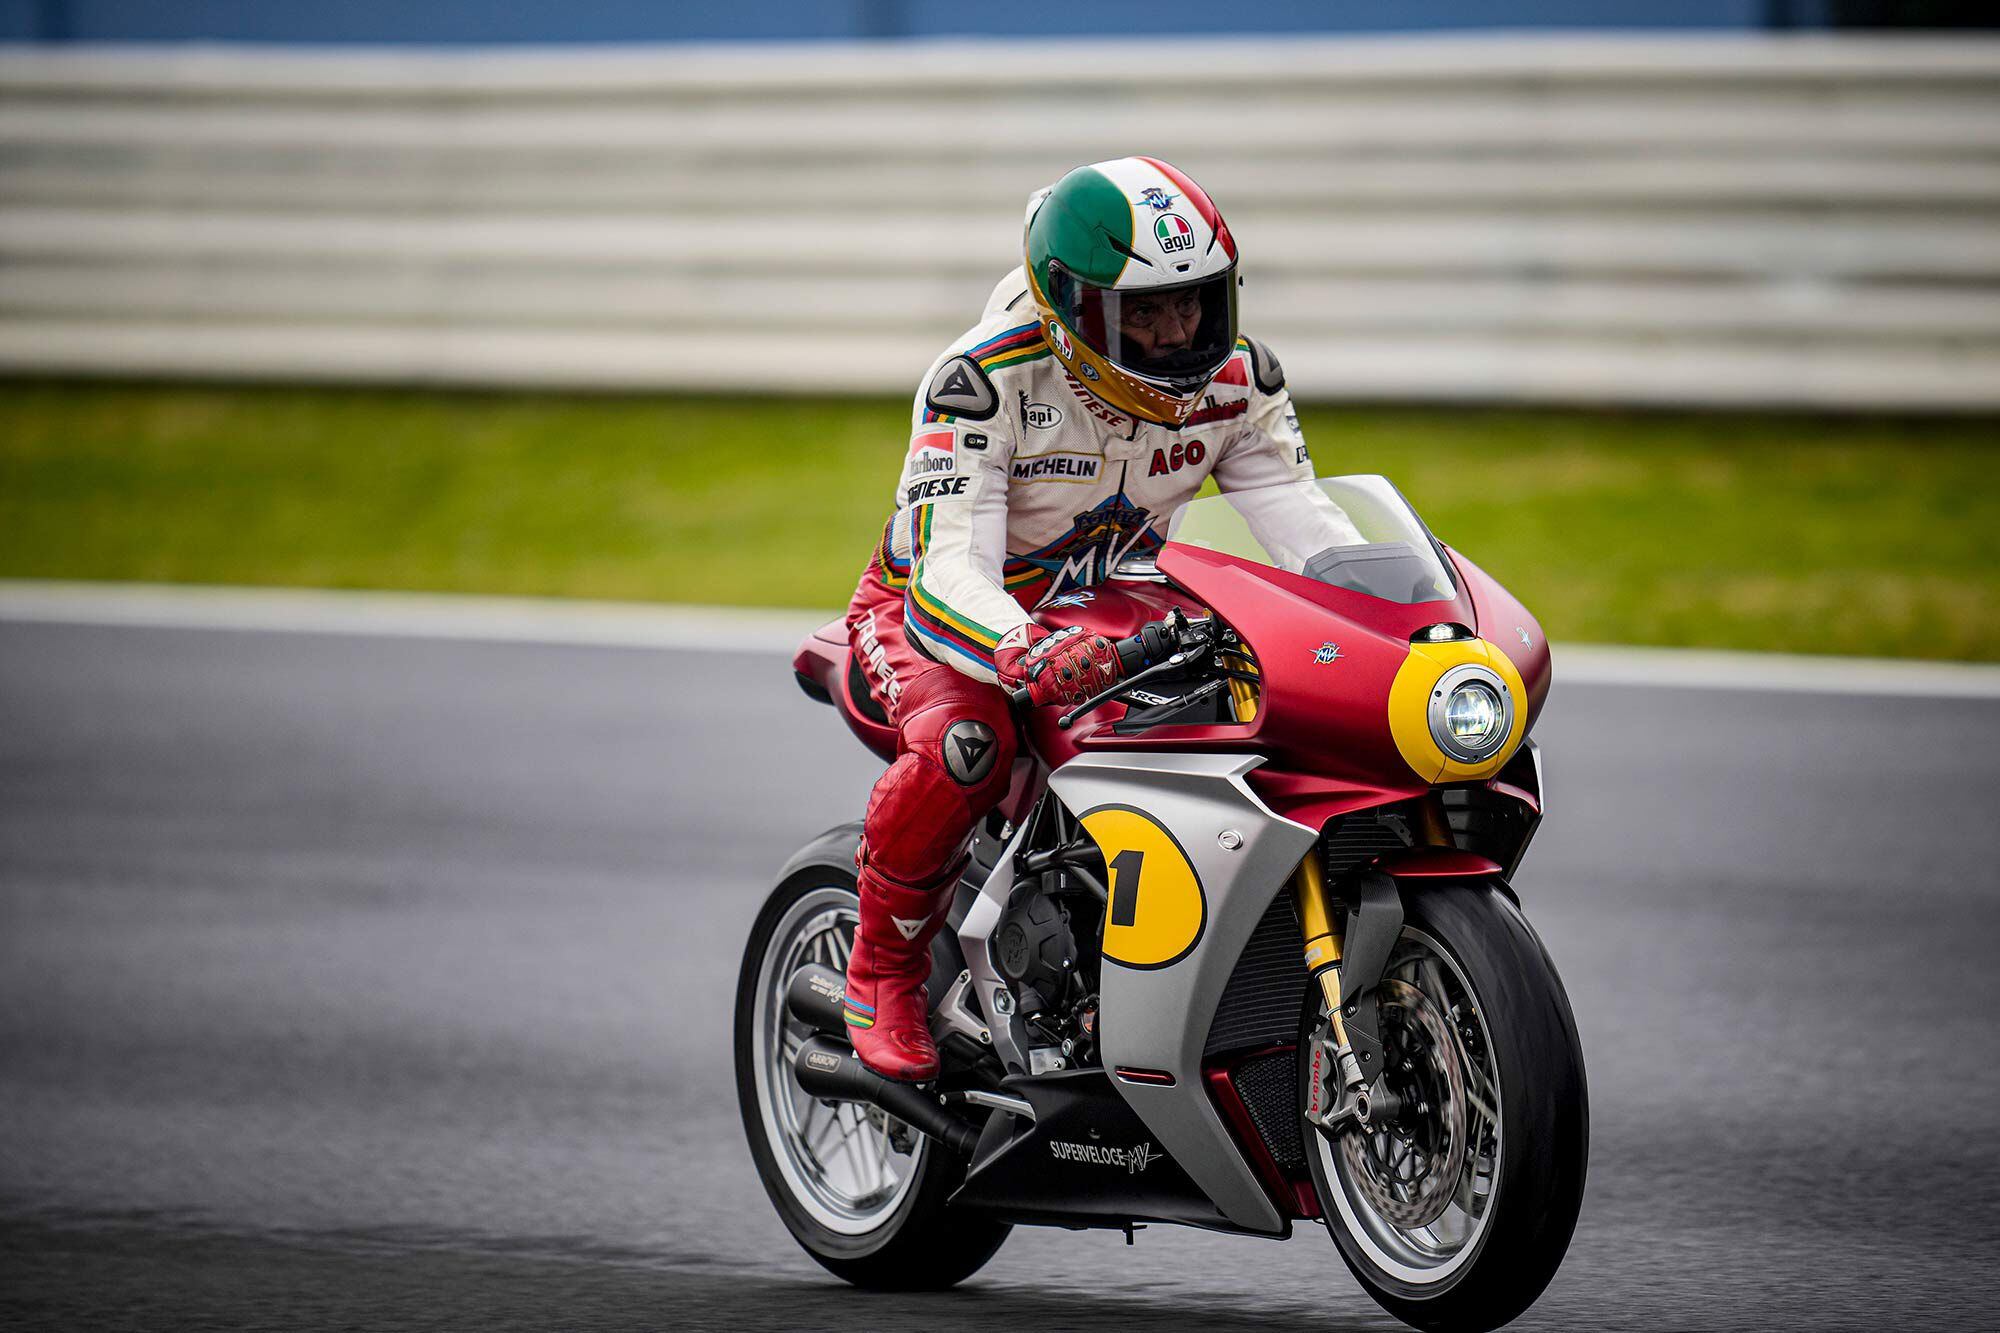 Only the helmet gives it away. Agostini still fits into his leathers, and rides like a world title depends on it. No racer is tied as closely to MV as Ago.